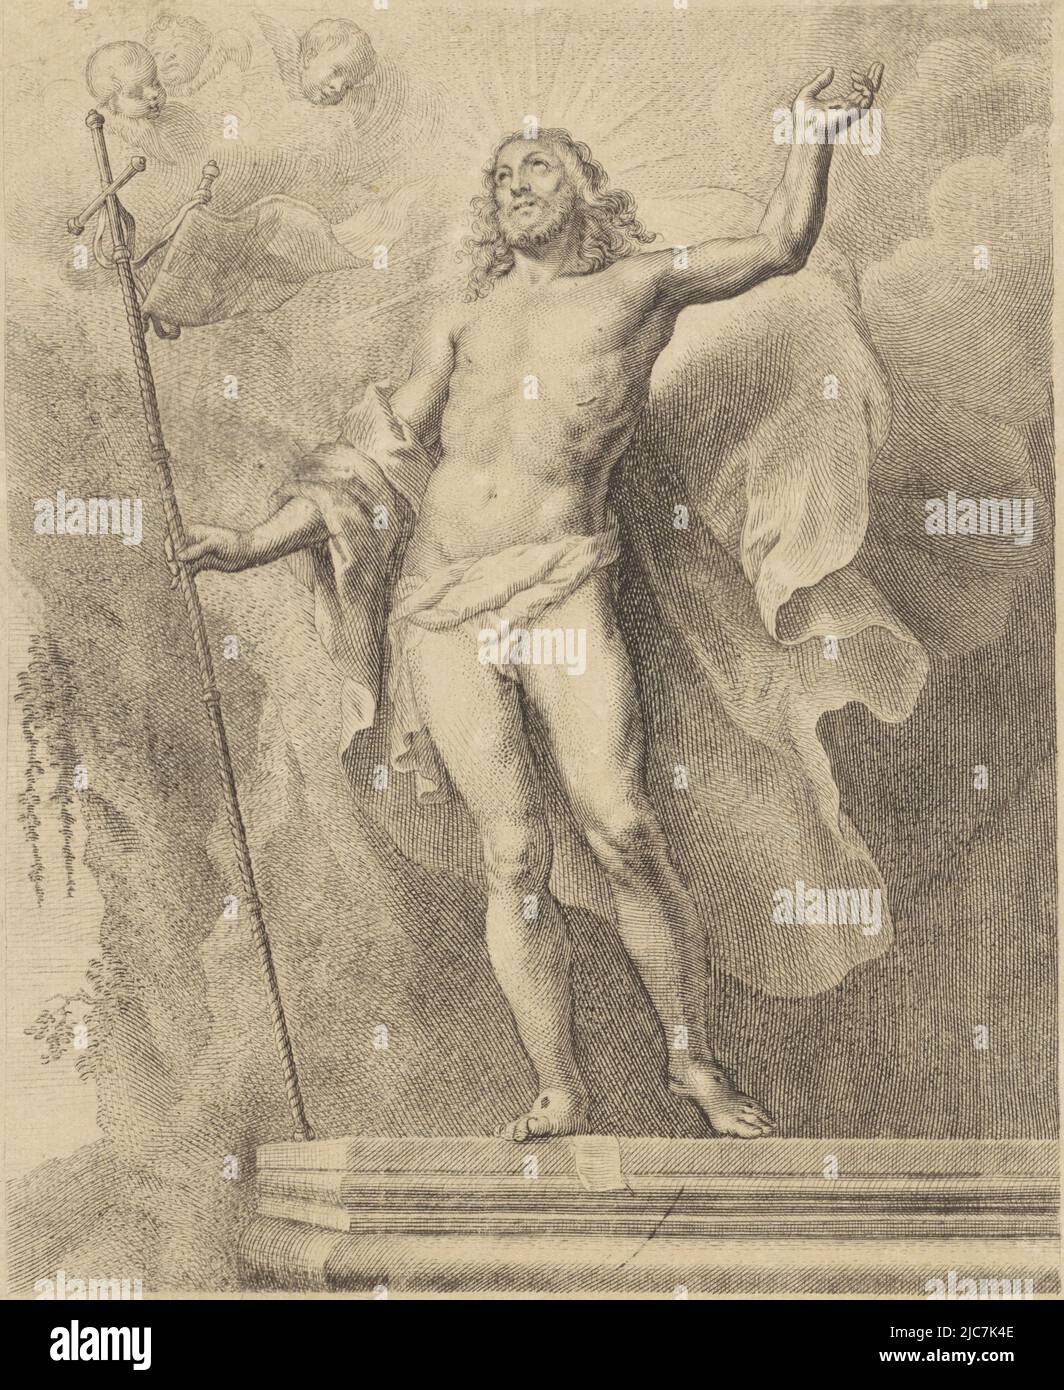 The risen Christ stands on his tomb. He looks up and holds a cross with a banner in his right hand. Above the staff are three Cherubim. In the margin a one-line, laudatory caption about the deceased painter in Latin. Resurrection of Christ, print maker: anonymous, after: Gaspar de Crayer, (mentioned on object), publisher: Cornelis Galle (II), (mentioned on object), print maker: Low Countries, after: Southern Netherlands, publisher: Antwerp, 1669 - 1678, paper, engraving, h 263 mm × w 210 mm Stock Photo